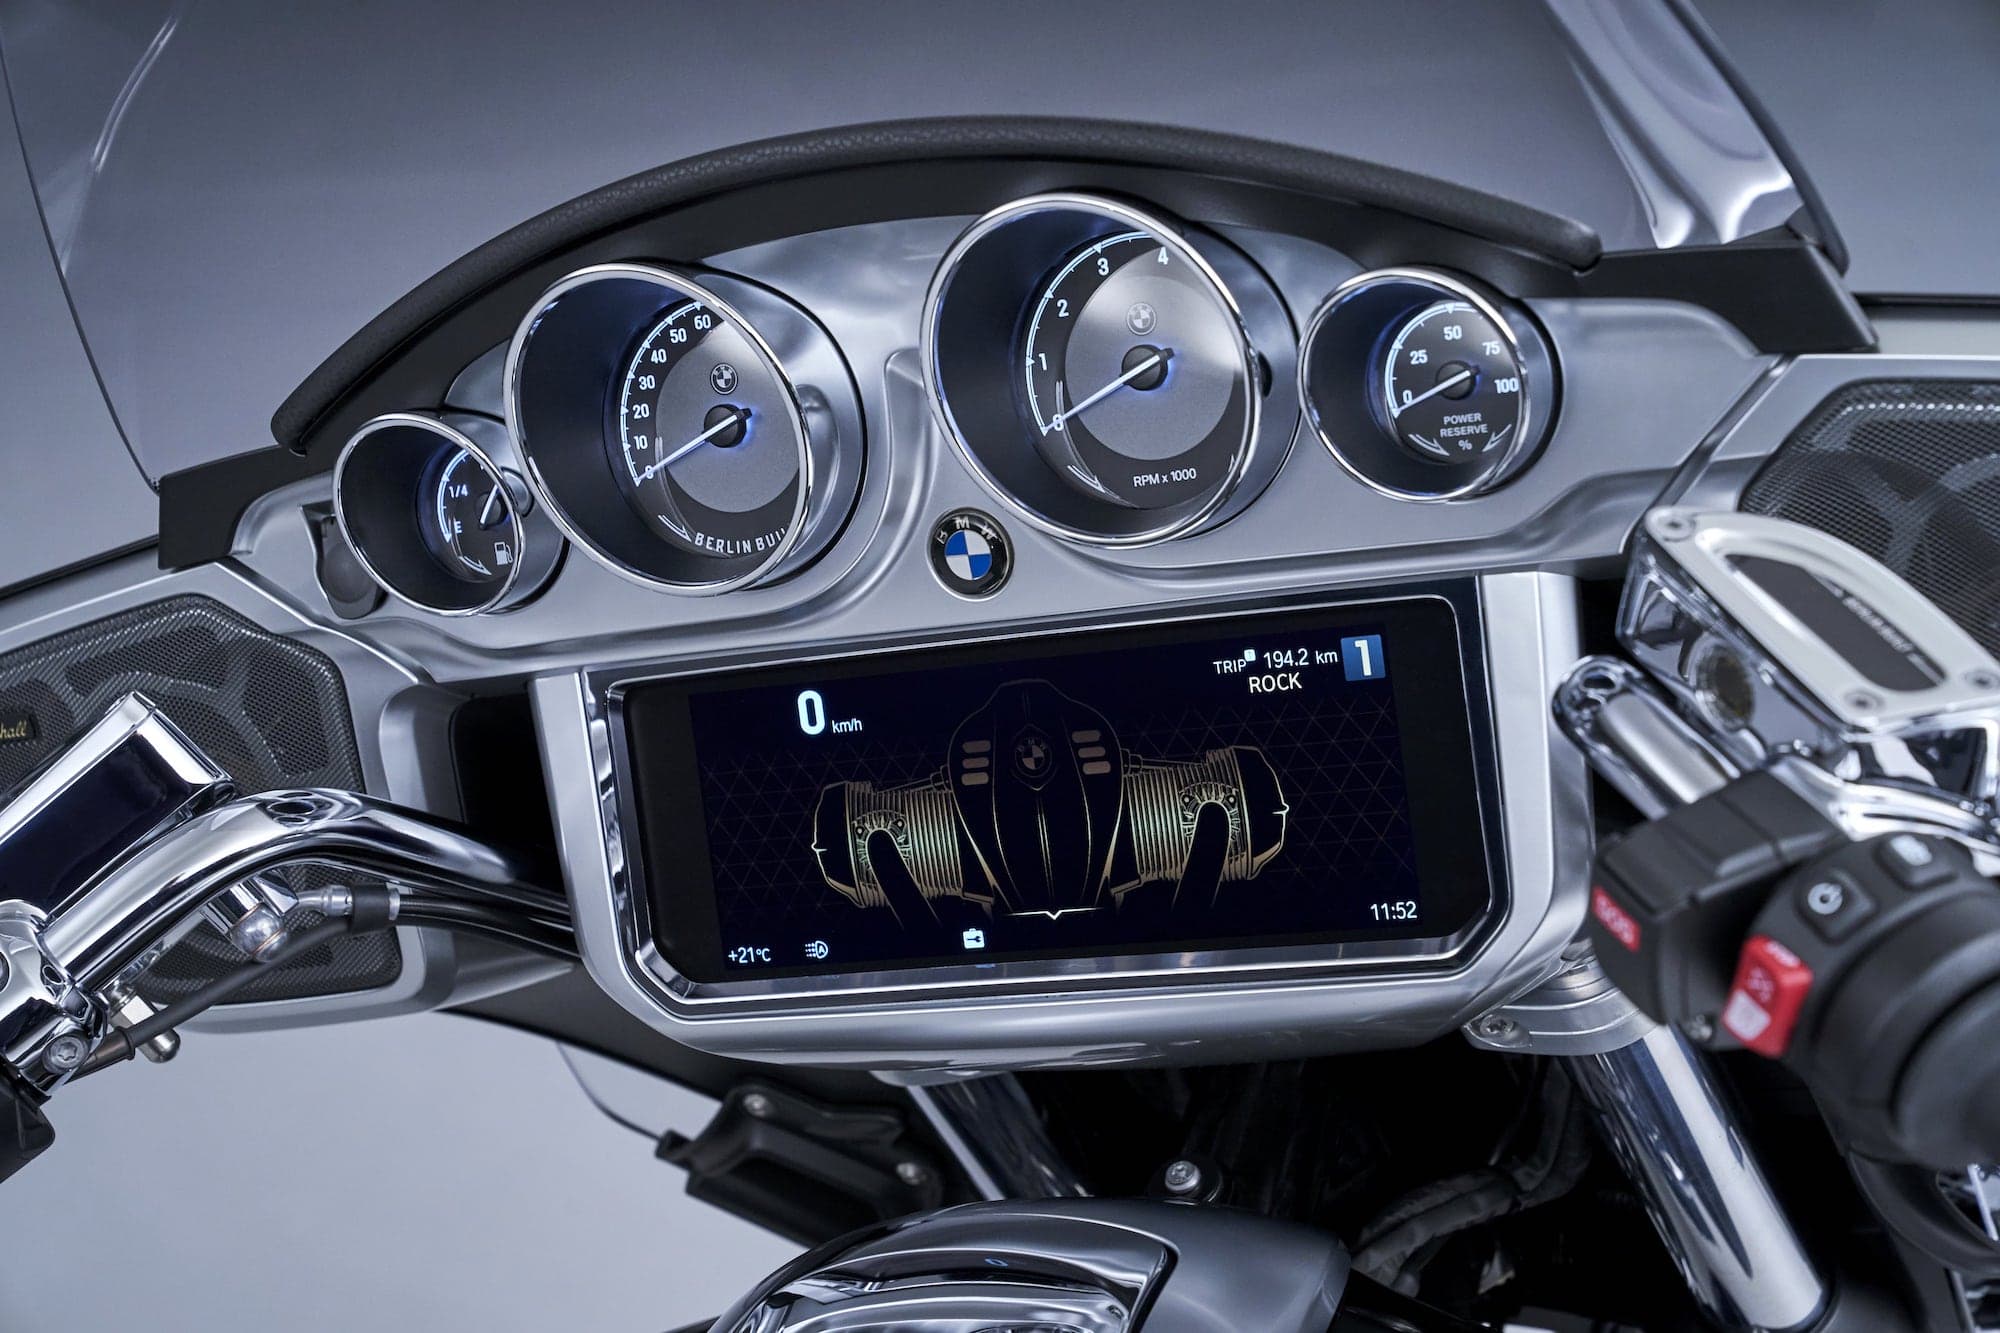 BMW R 18 Transcontinental instrument cluster and dash